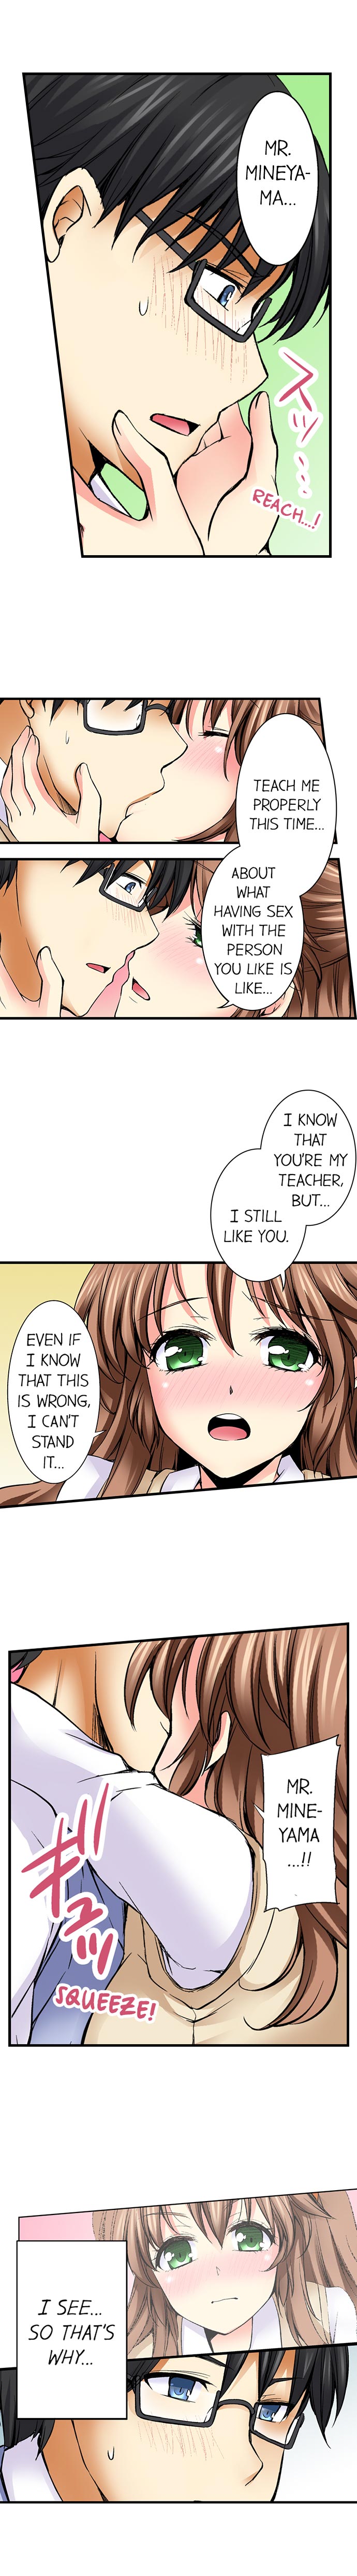 Why Can't i Have Sex With My Teacher? - Chapter 8 Page 7